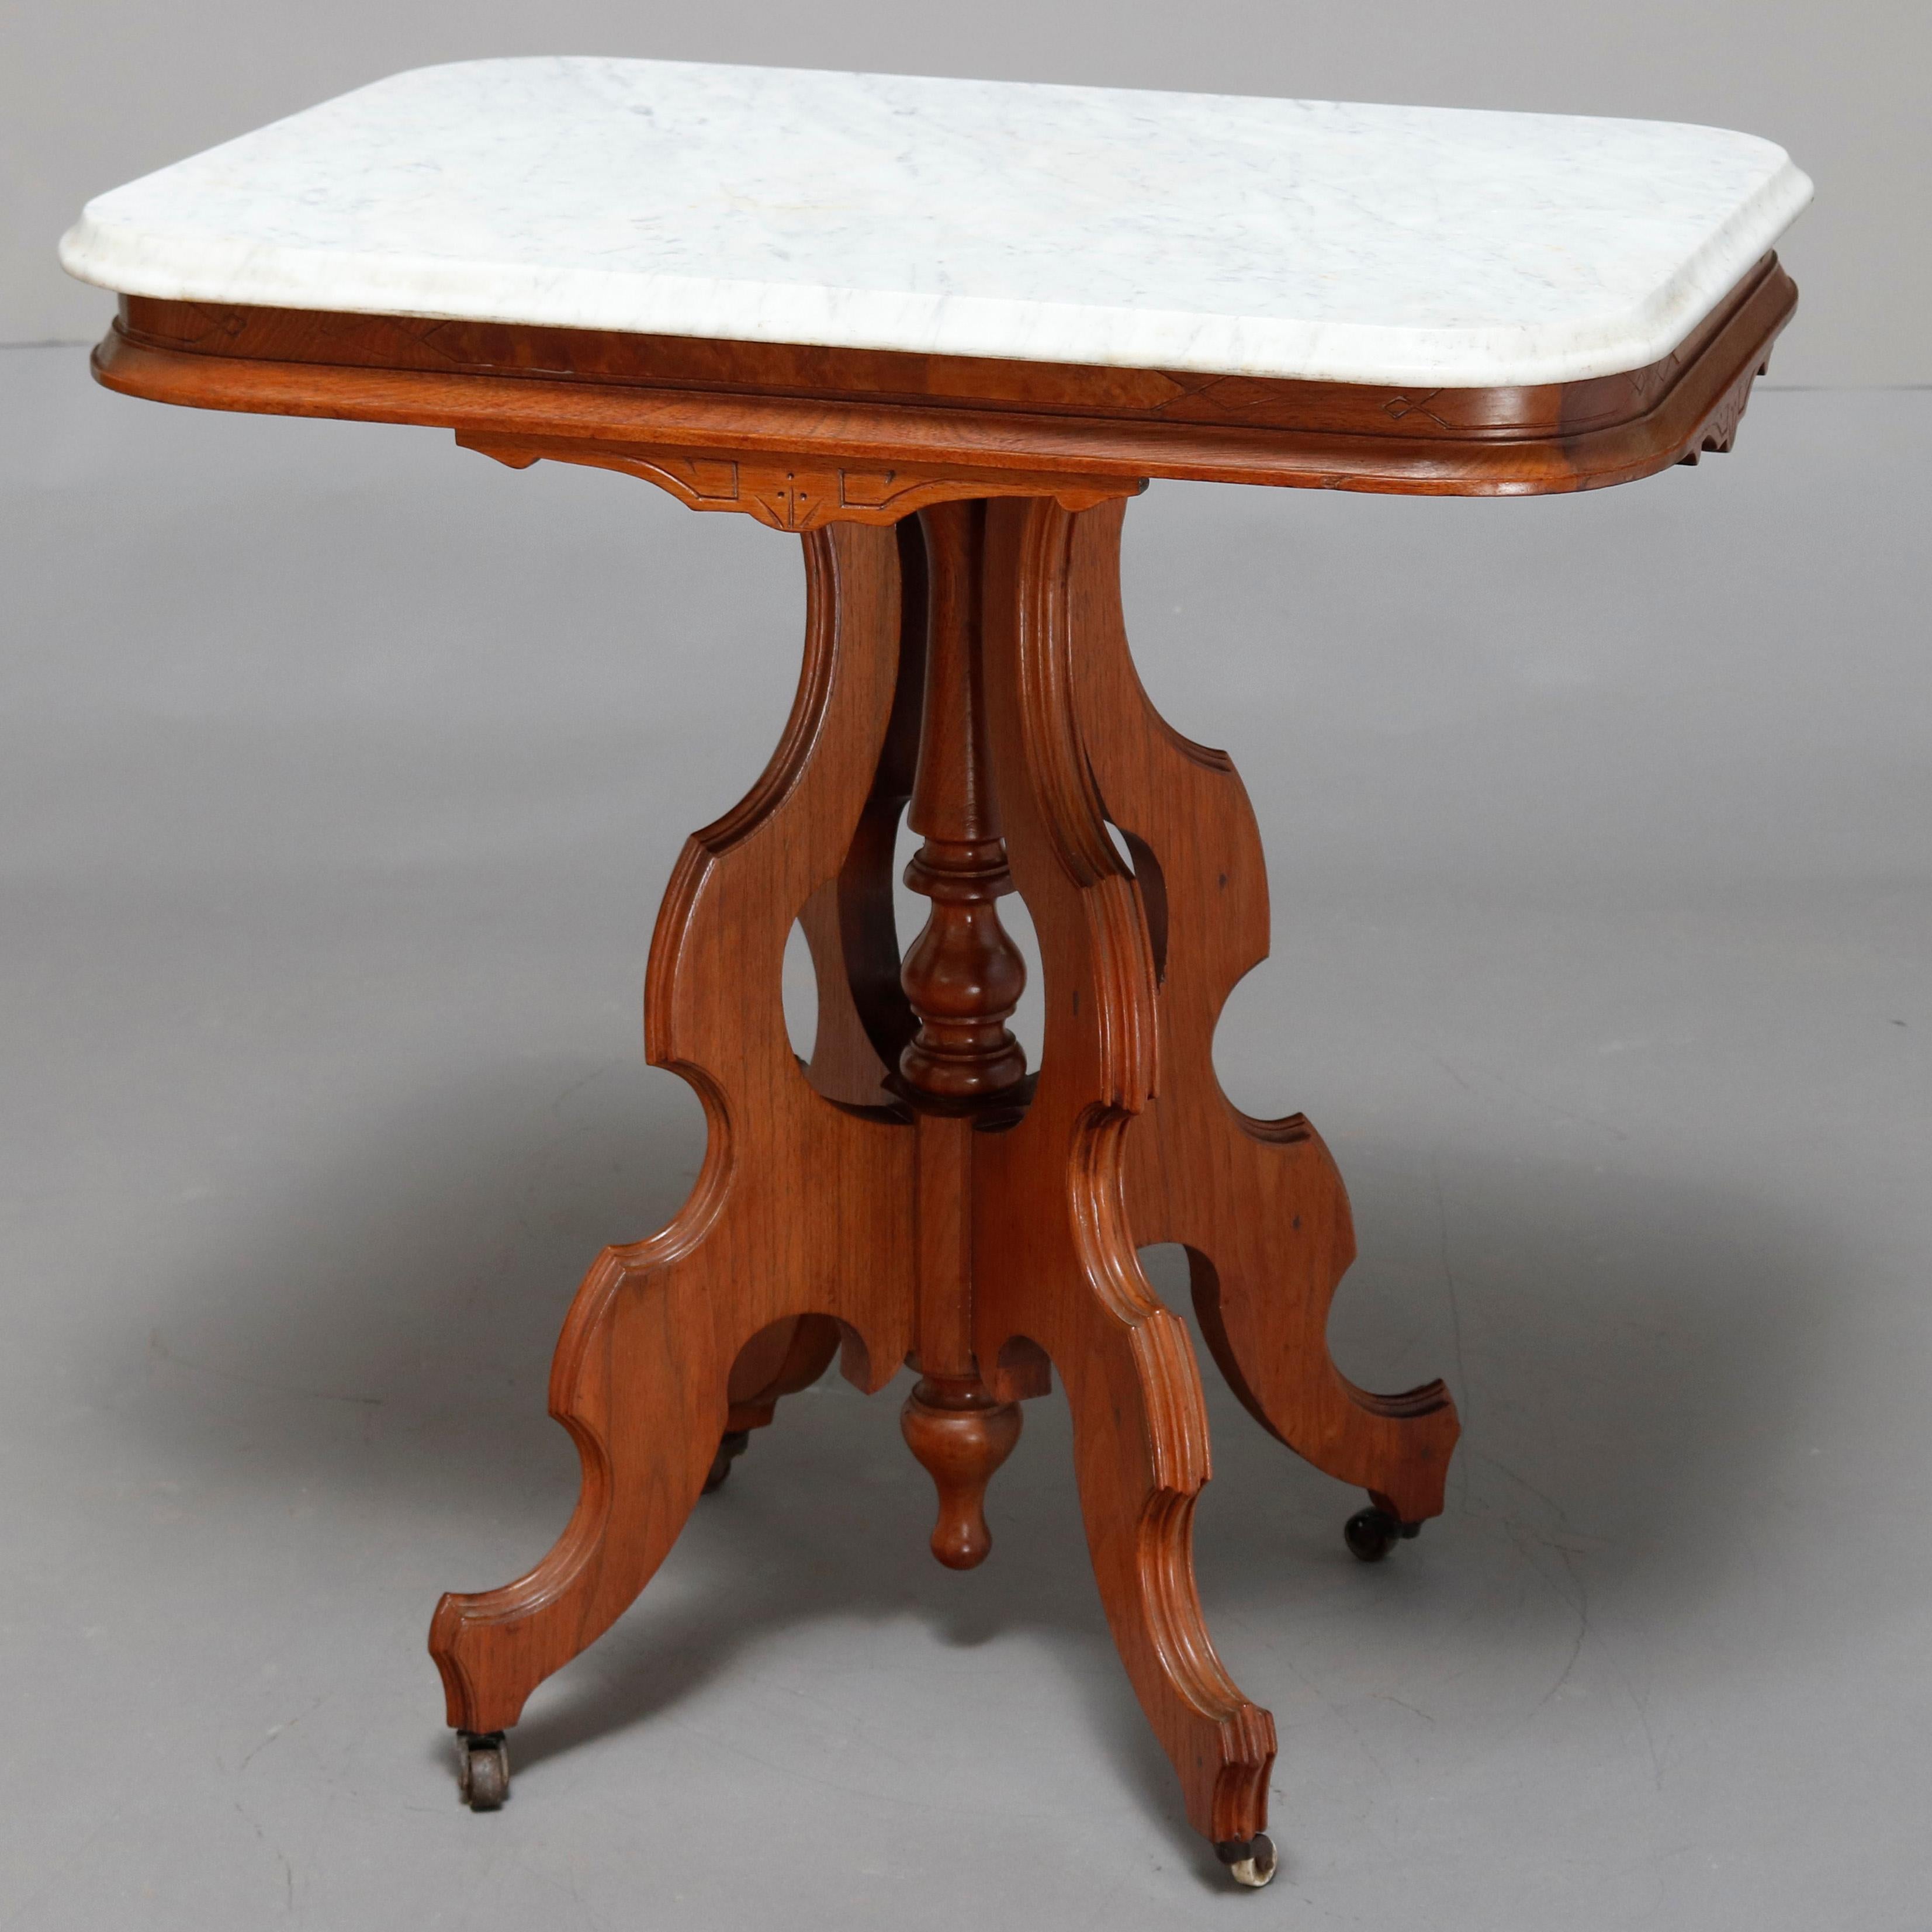 American Antique Victorian Eastlake Carved Walnut & Beveled Marble Side Table, circa 1880